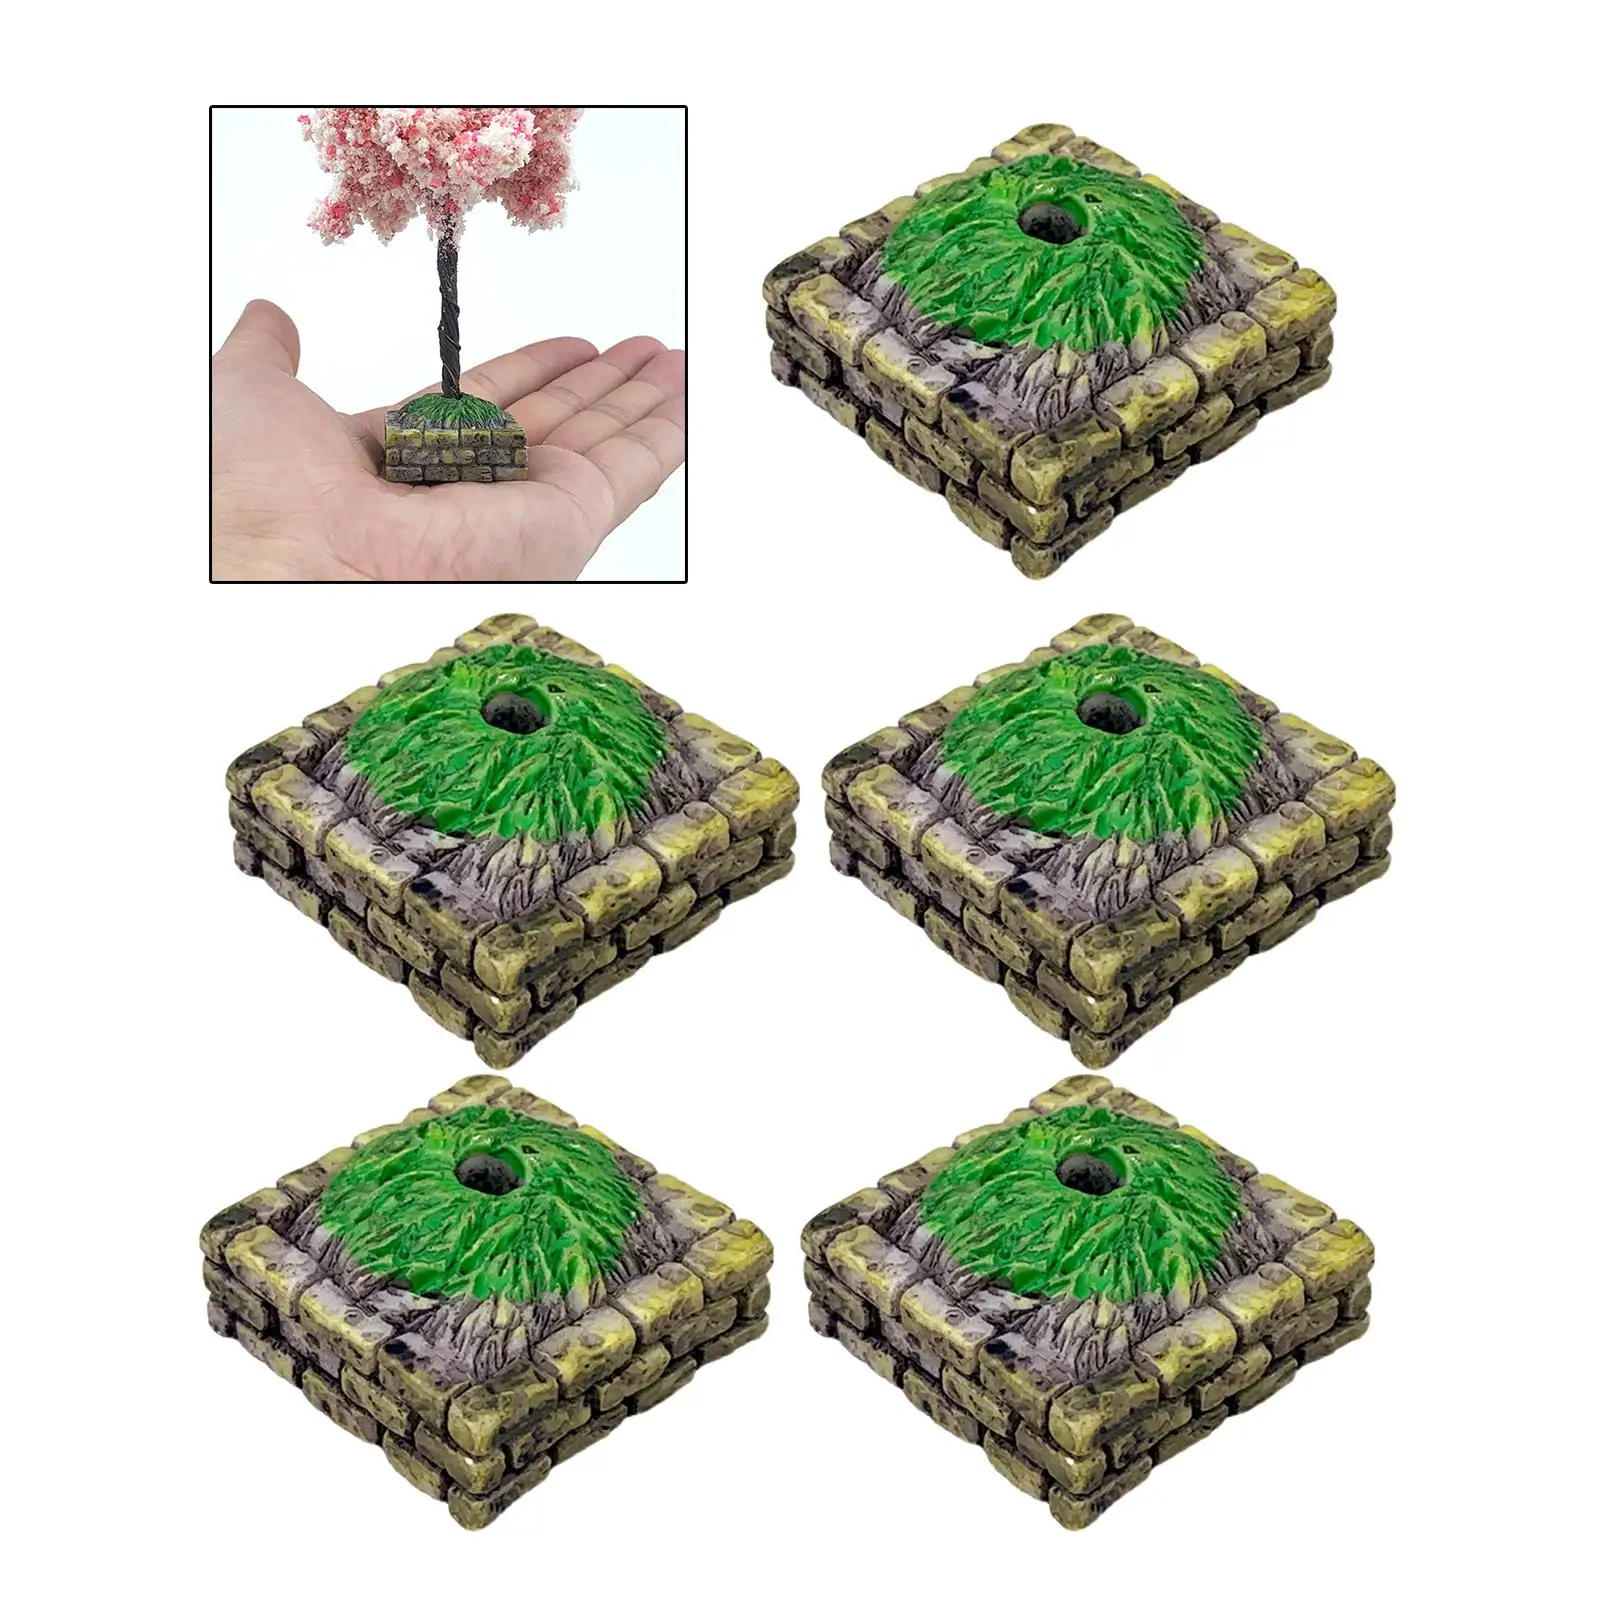 5 Pieces Simulation Tree Altar Base Stand DIY Supplies Multipurpose Practical Decorative Figurines for Fairy Garden Sand Table